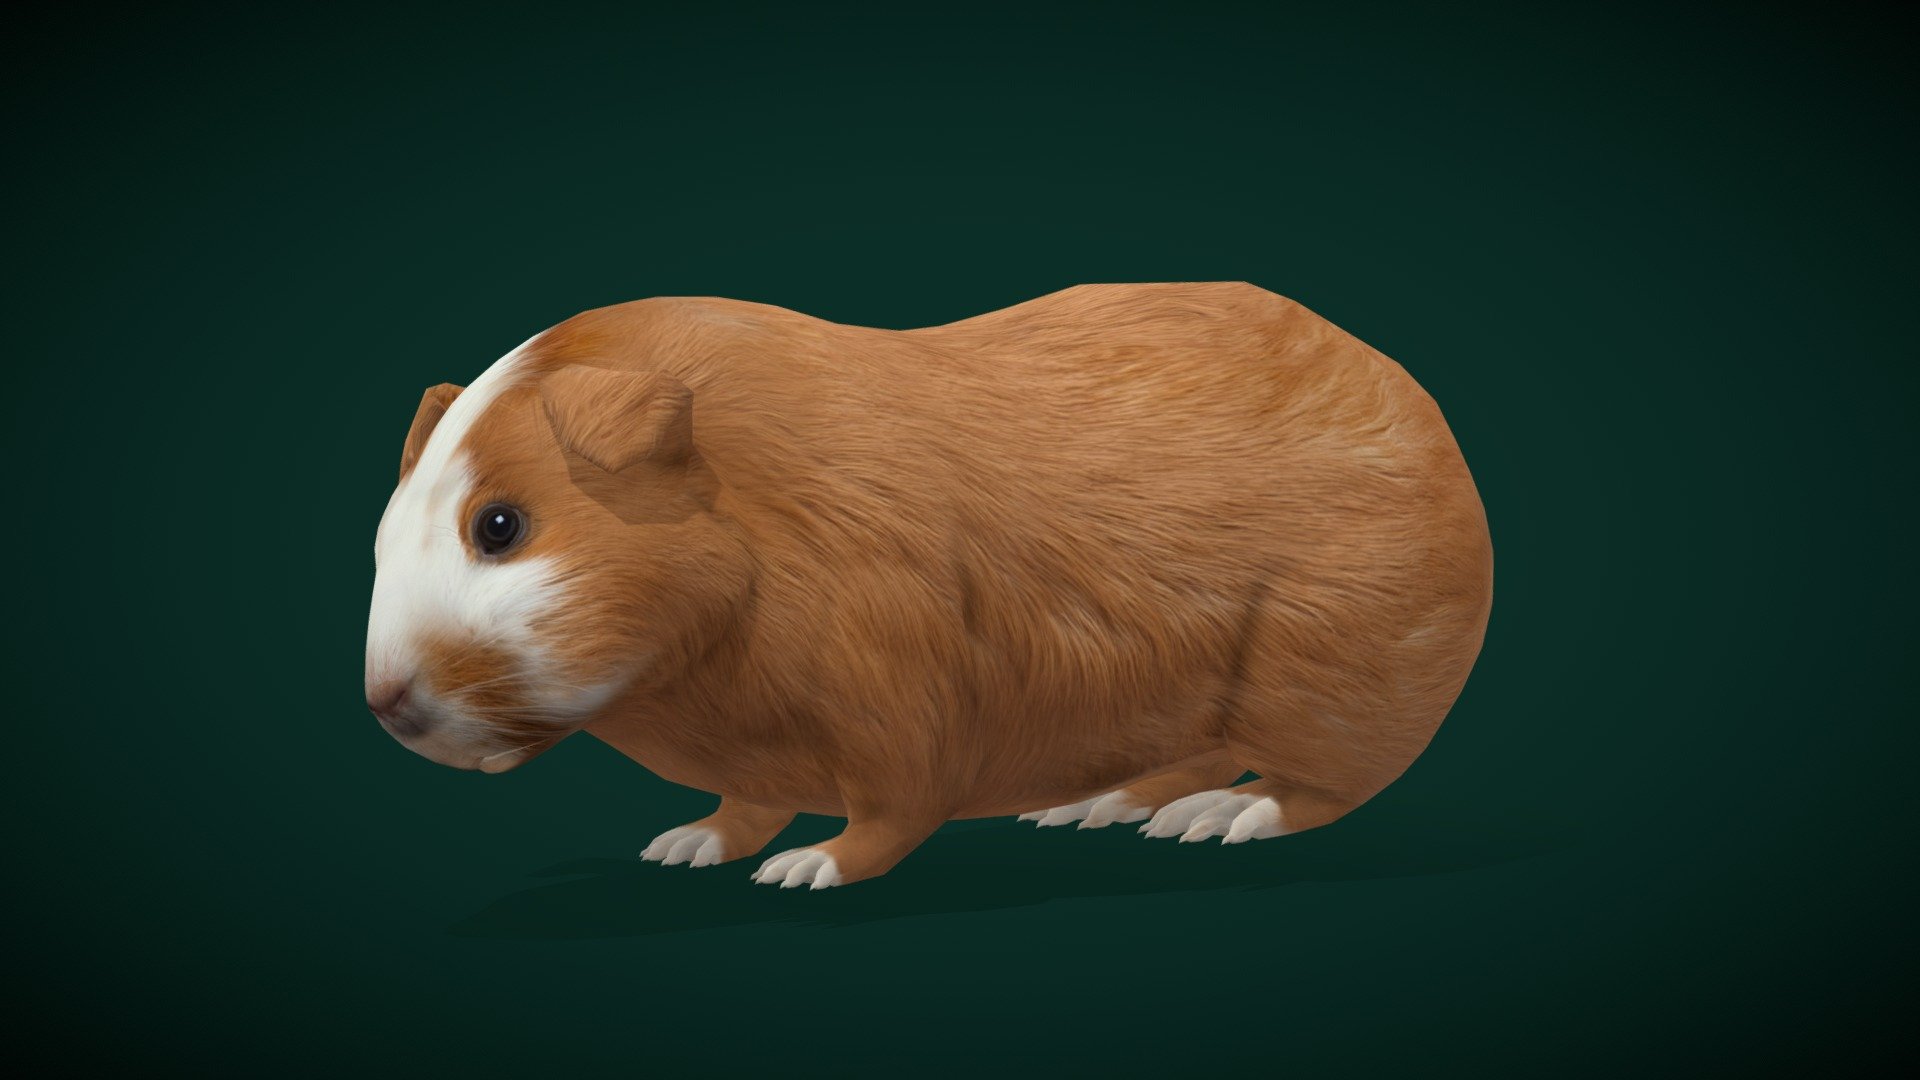 Guinea Pig(Domestic cavy)  Pet,Cute

Cavia porcellus Animal  Rodents (Caviidae)

1 Draw Calls

Low Poly

GameReady

Subdivision Surface Ready

15 Animations

4K PBR Textures  Materials 

Unreal FBX (Unreal 4,5 Plus)

Unity FBX  

Blend File 3.6.5 LTS

USDZ File (AR Ready). Real Scale Dimension

Textures Files

GLB File (Unreal 5.1  Plus Native Support)


Gltf File ( Spark AR, Lens Studio(SnapChat) , Effector(Tiktok) , Spline, Play Canvas,Omiverse ) Compatible




Triangles : 5532



Vertices  : 2782

Faces     : 2796

Edges     : 5575

Diffuse, Metallic, Roughness , Normal Map ,Specular Map,AO
 The guinea pig or domestic guinea pig, also known as the cavy or domestic cavy, is a species of rodent belonging to the genus Cavia in the family Caviidae.
 Collective noun: herd Wikimedia Foundation
Lifespan: 5 – 7 years
Gestation period: 59 – 72 days (Adult)
Mass: 0.9 – 1.2 kg (Male, Adult)
Eaten by: Red fox
Eats: Timothy, Spinach, Grasses, Carrot - Domestic Guinea Pig Rodent (Lowpoly) - Buy Royalty Free 3D model by Nyilonelycompany 3d model